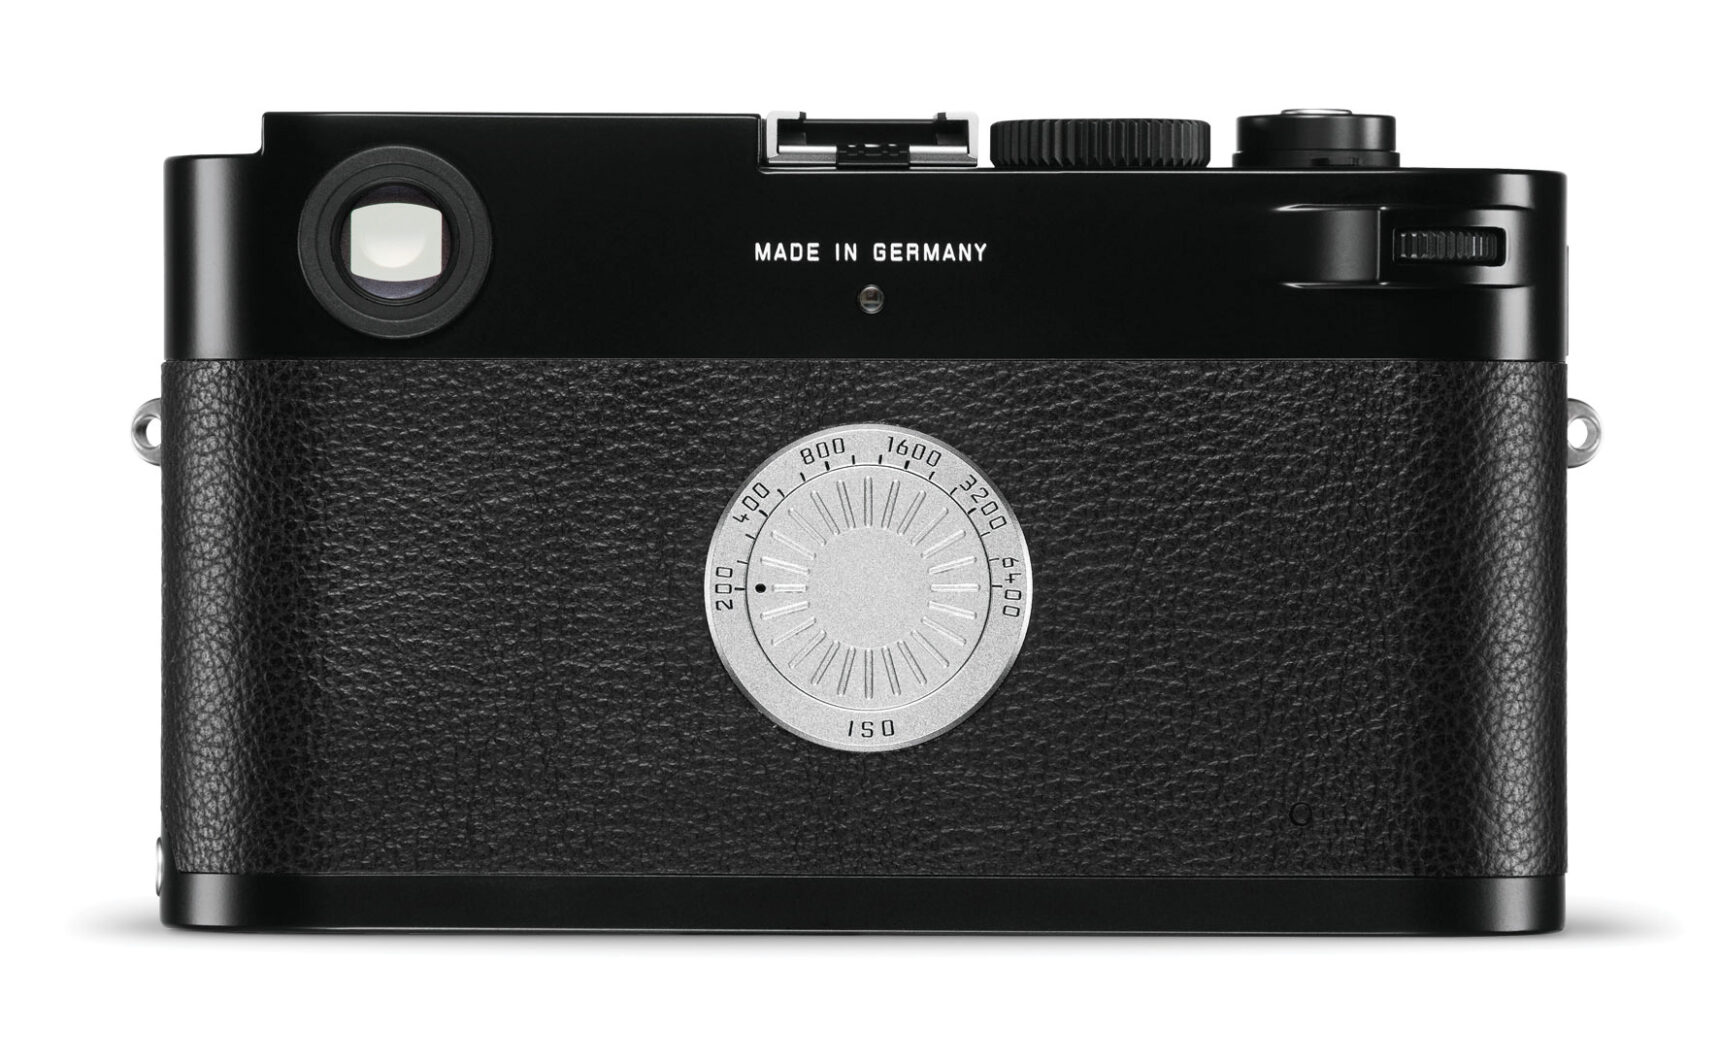 Leica M-D (Typ 262) Is Missing More Than An LCD